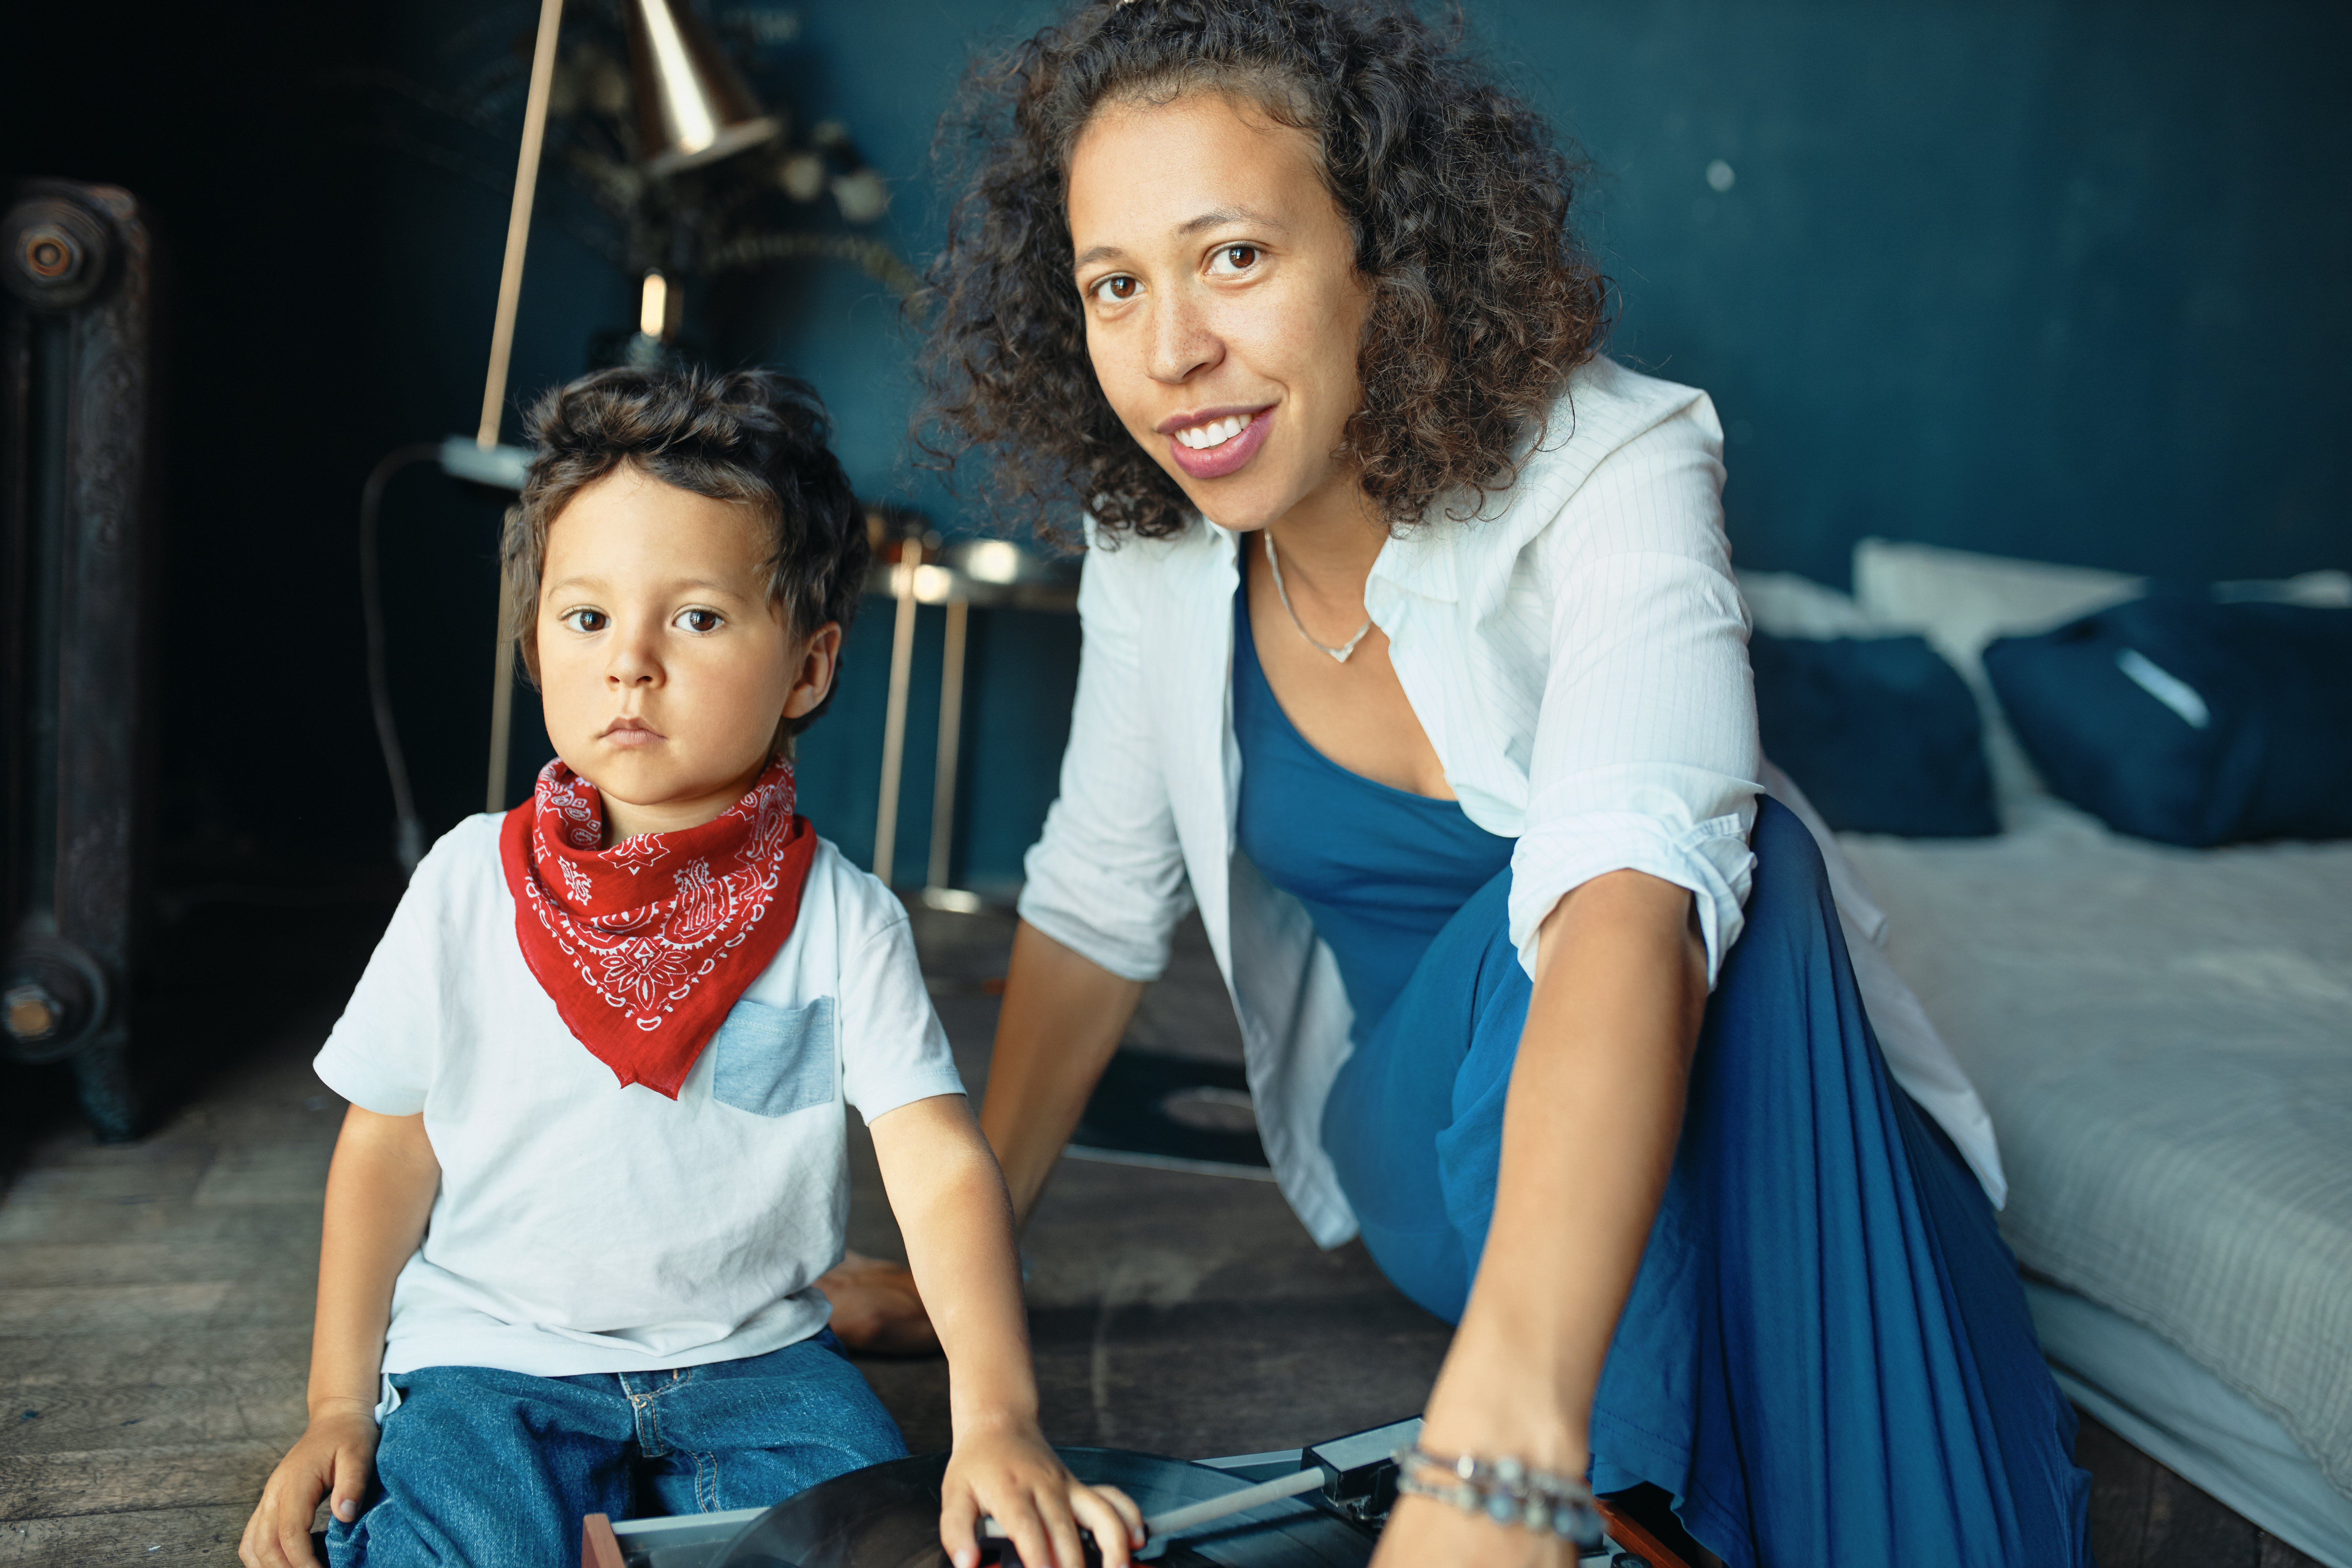 portrait-of-serious-little-boy-with-chubby-cheeks-and-red-kerchief-around-his-neck-sitting-on-floor-with-mom